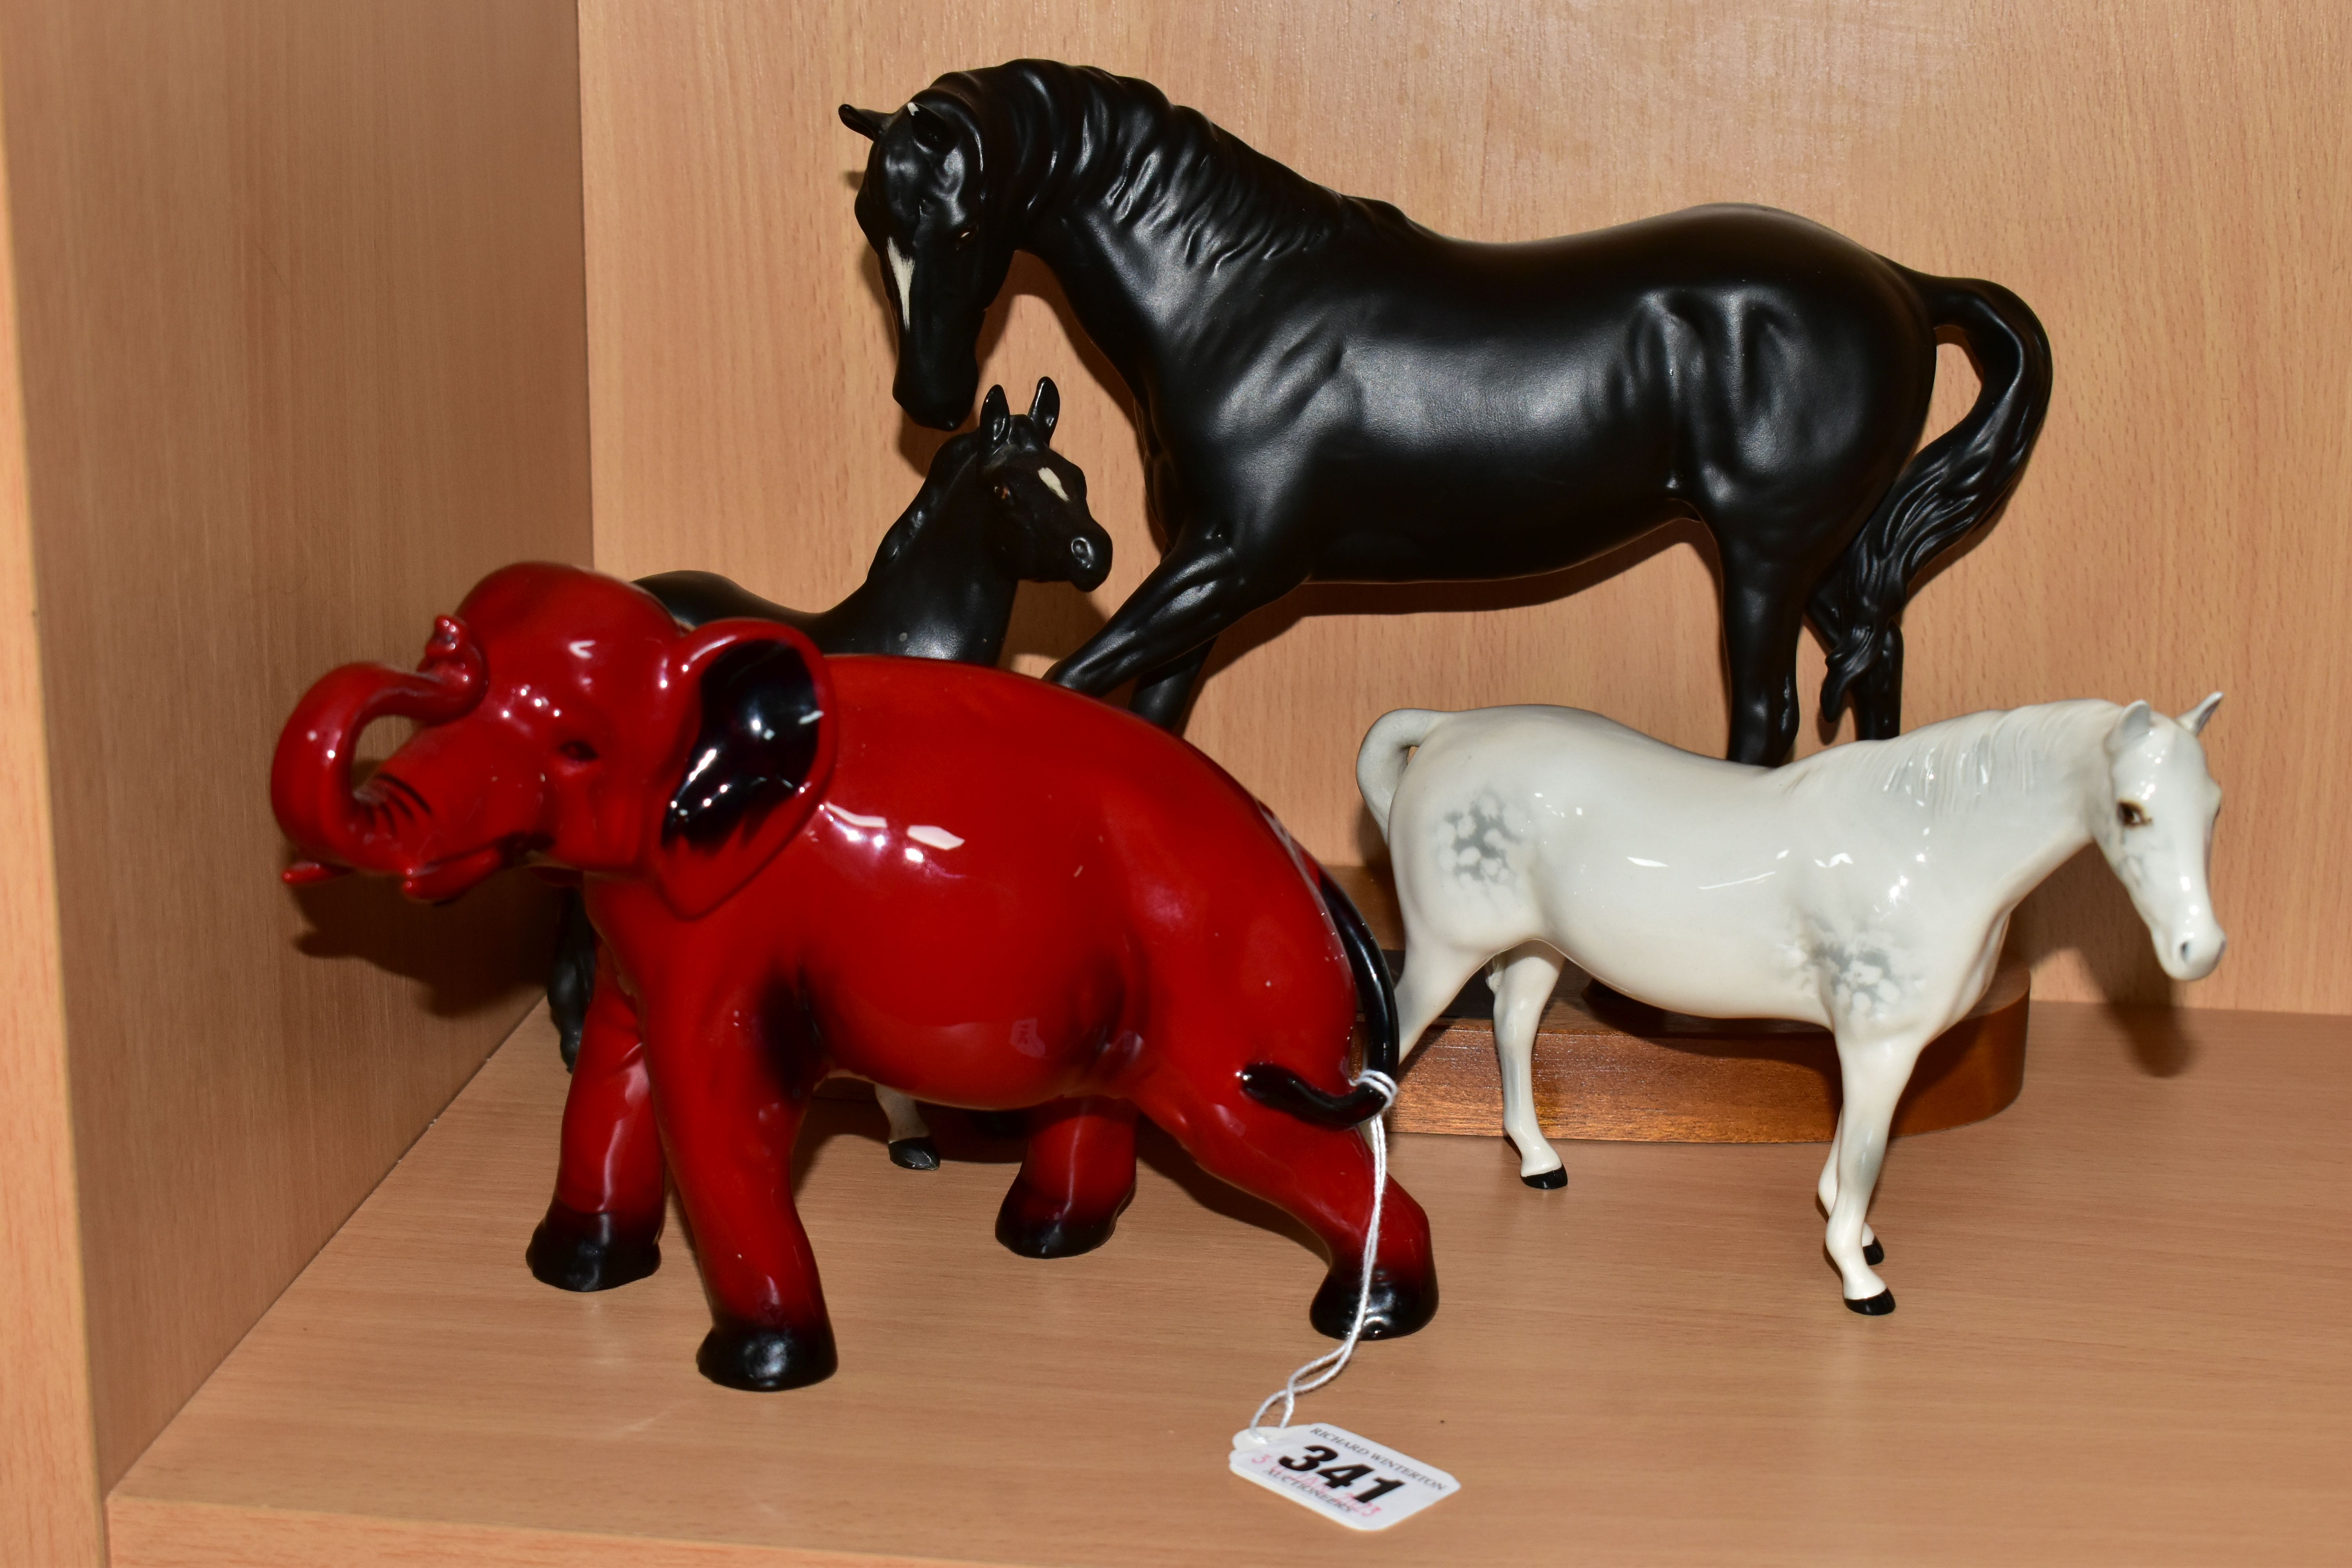 A ROYAL DOULTON FLAMBÉ ELEPHANT FIGURE TOGETHER WITH TWO BESWICK HORSE FIGURES, the elephant